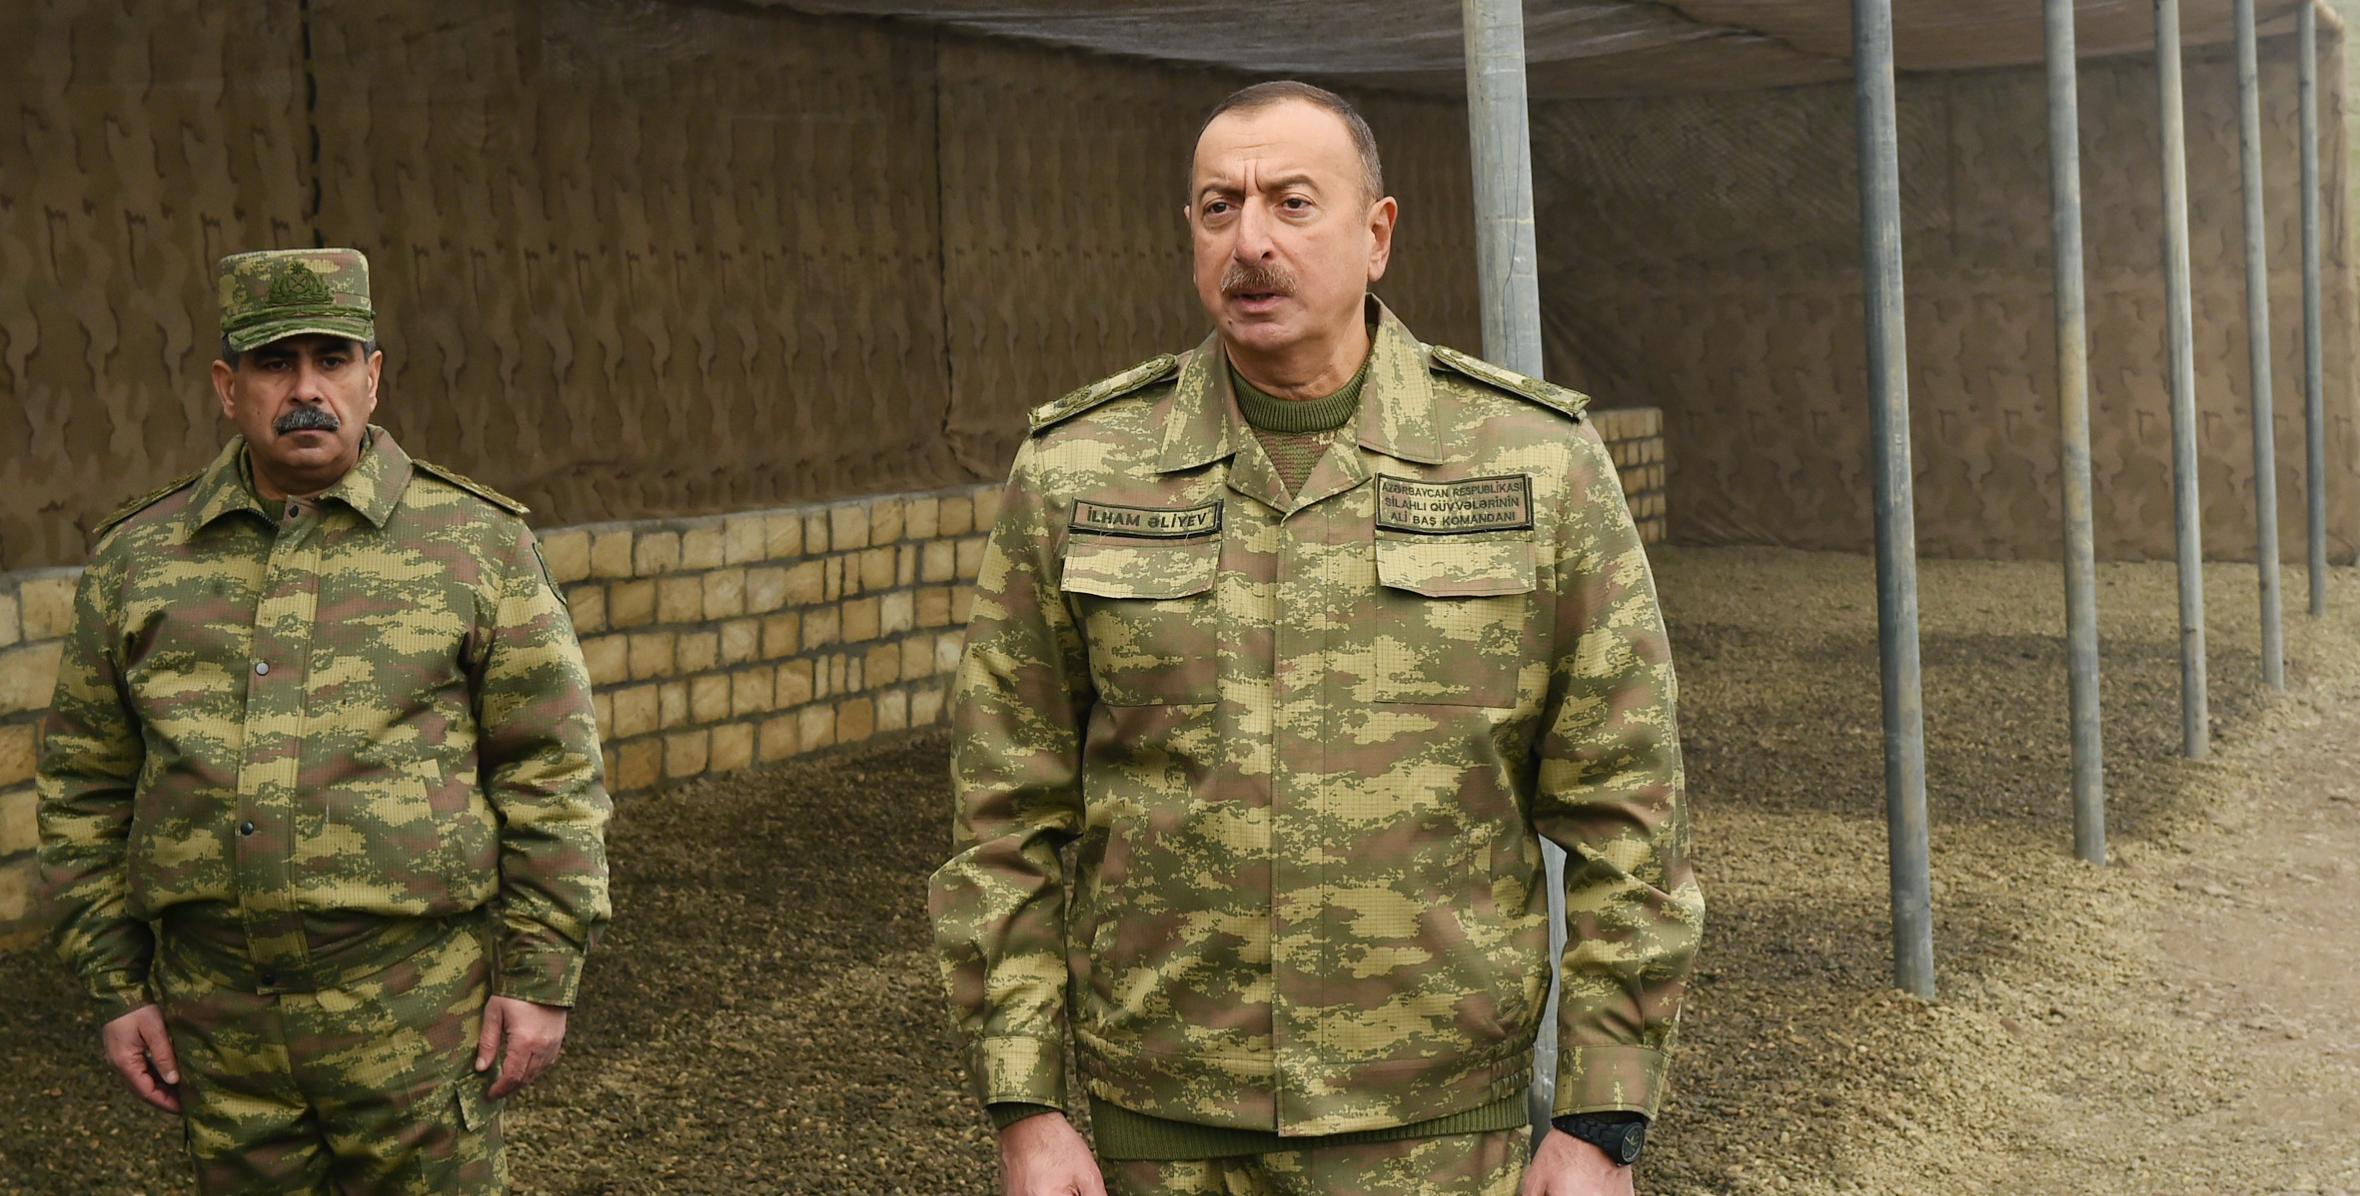 Speech by Ilham Aliyev during the visit of operational conditions in frontline command control center